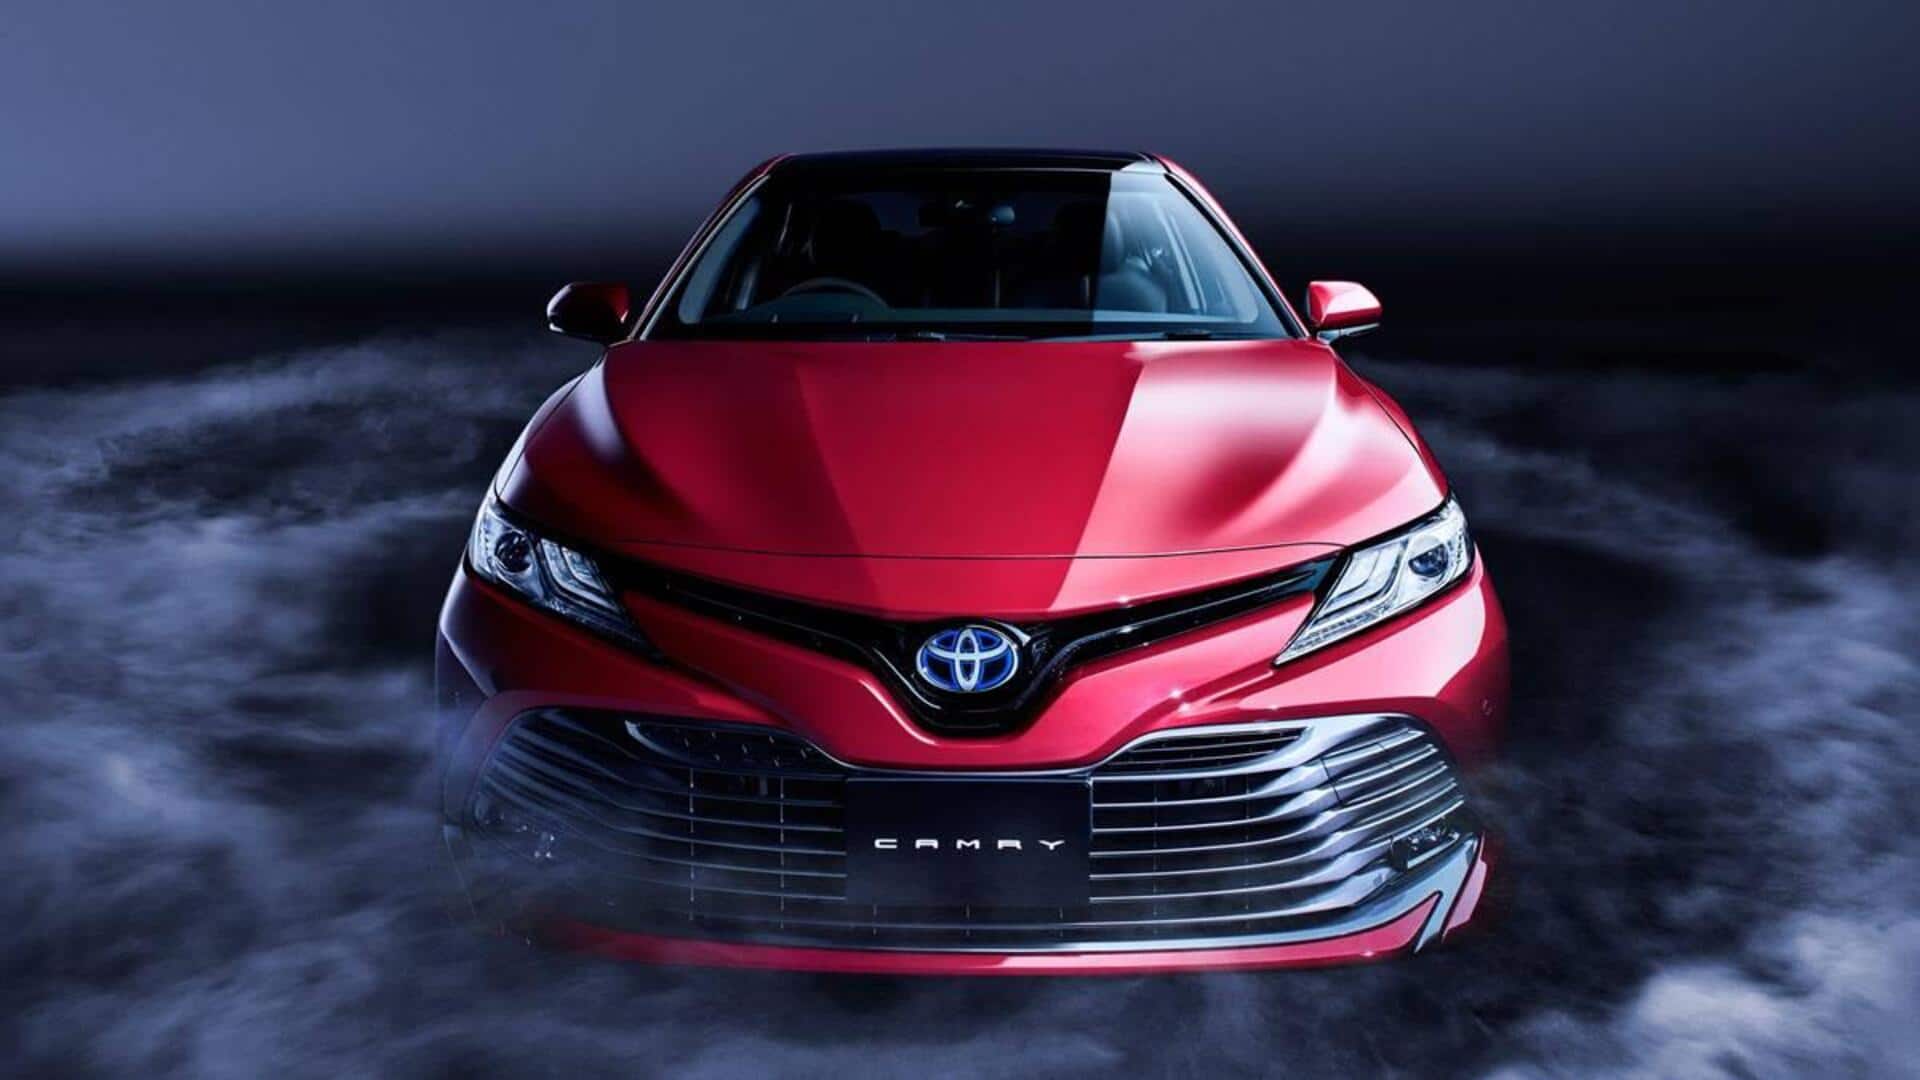 Toyota retains top-selling automaker title for 4th consecutive year